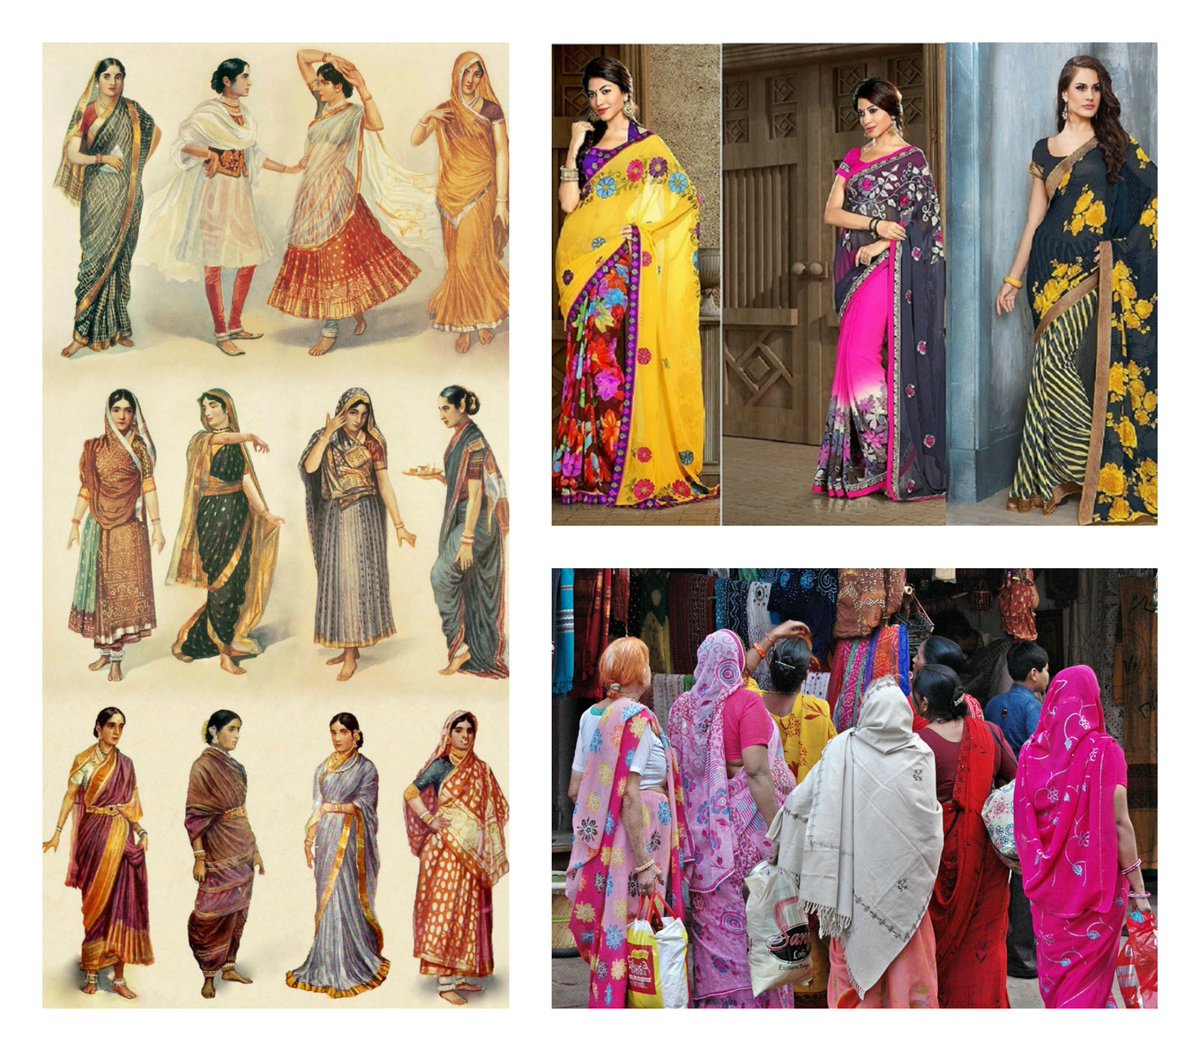  #SareeTwitterTRADITIONAL REGIONAL SAREES OF INDIA***********************************************SINCE SAREE TWITTER IS TRENDING I THOUGHT TO SHOW U DIFFERENT REGIONAL SAREES OF INDIA** INDIA IS A VASTLY DIVERSE COUNTRY WITH DIFFERENT LIFESTYLES . SO LETS START. SHALL WE